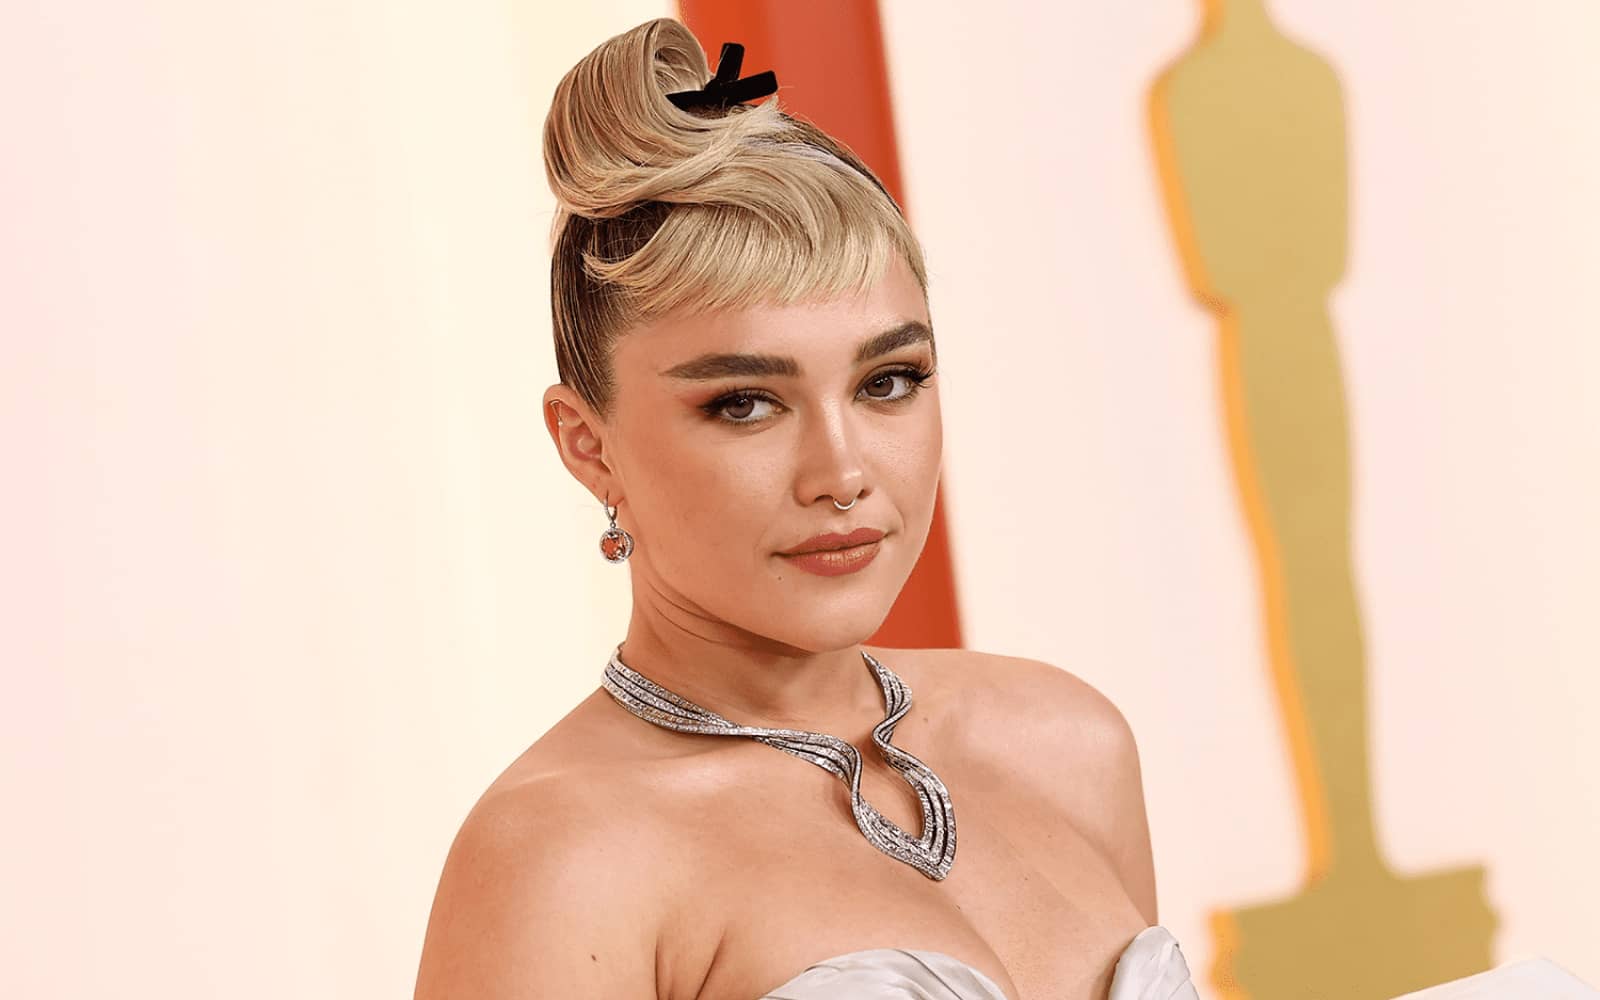 Florence Pugh wears a pair of Tiffany & Co. pink tourmaline and diamond drop earrings and necklace from the Tiffany & Co. Botanica collection to the Oscars 2023